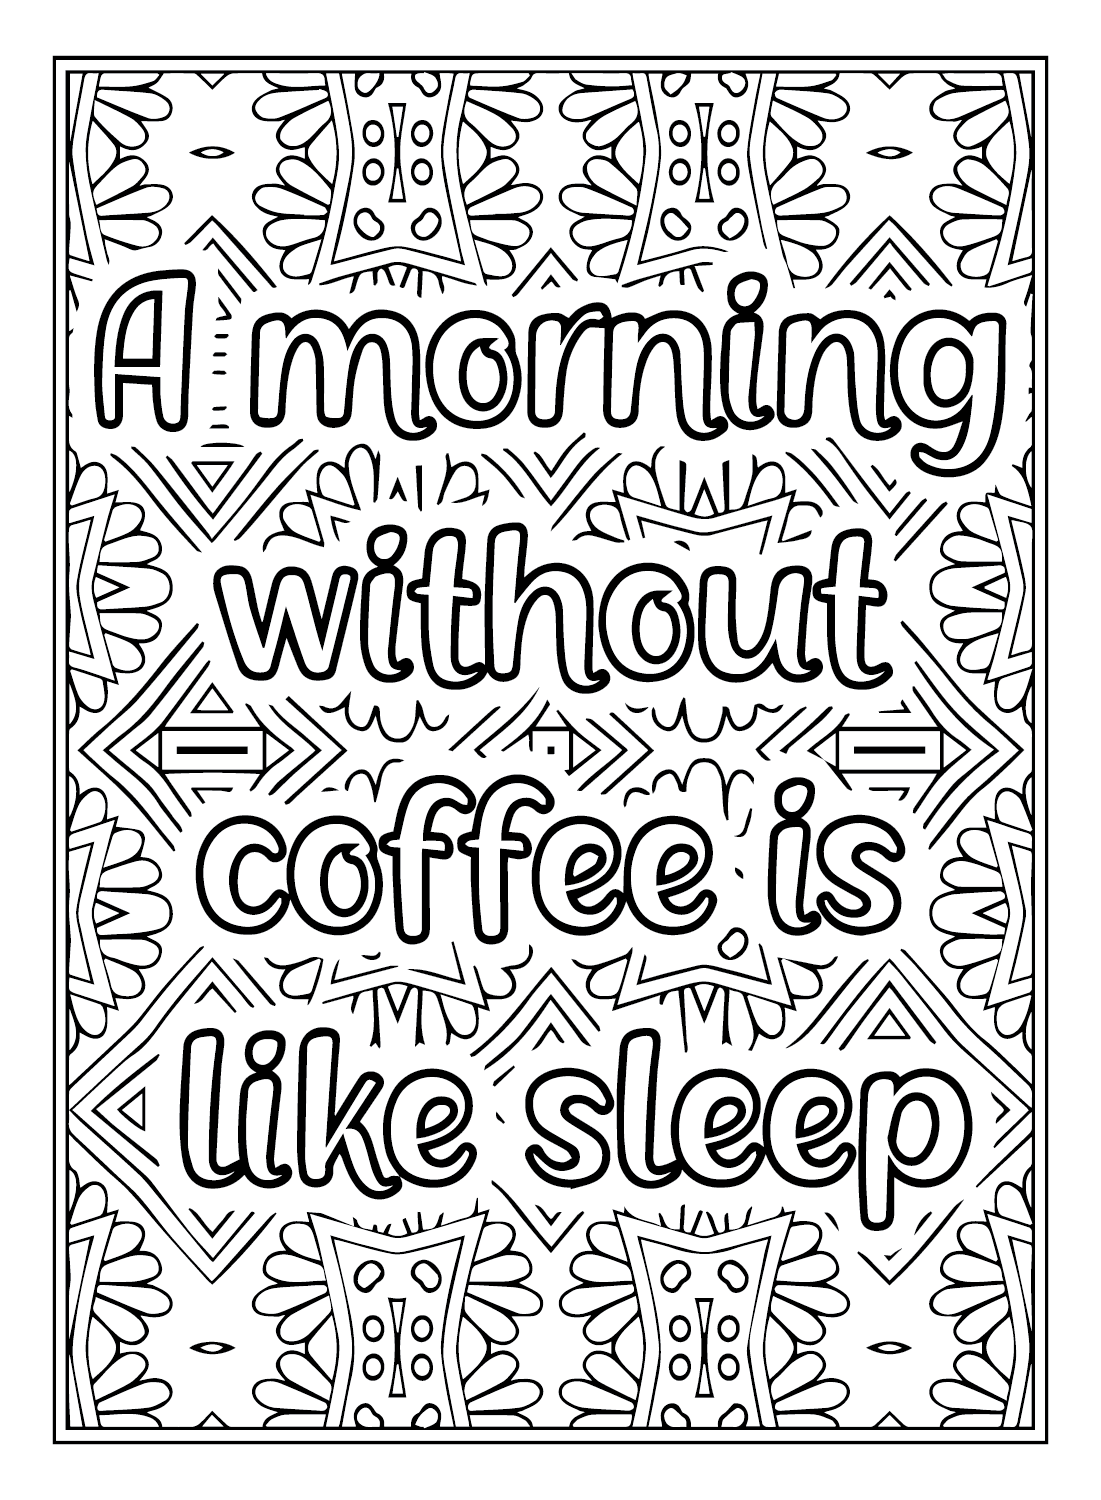 Short Inspirational Quotes Coloring Page